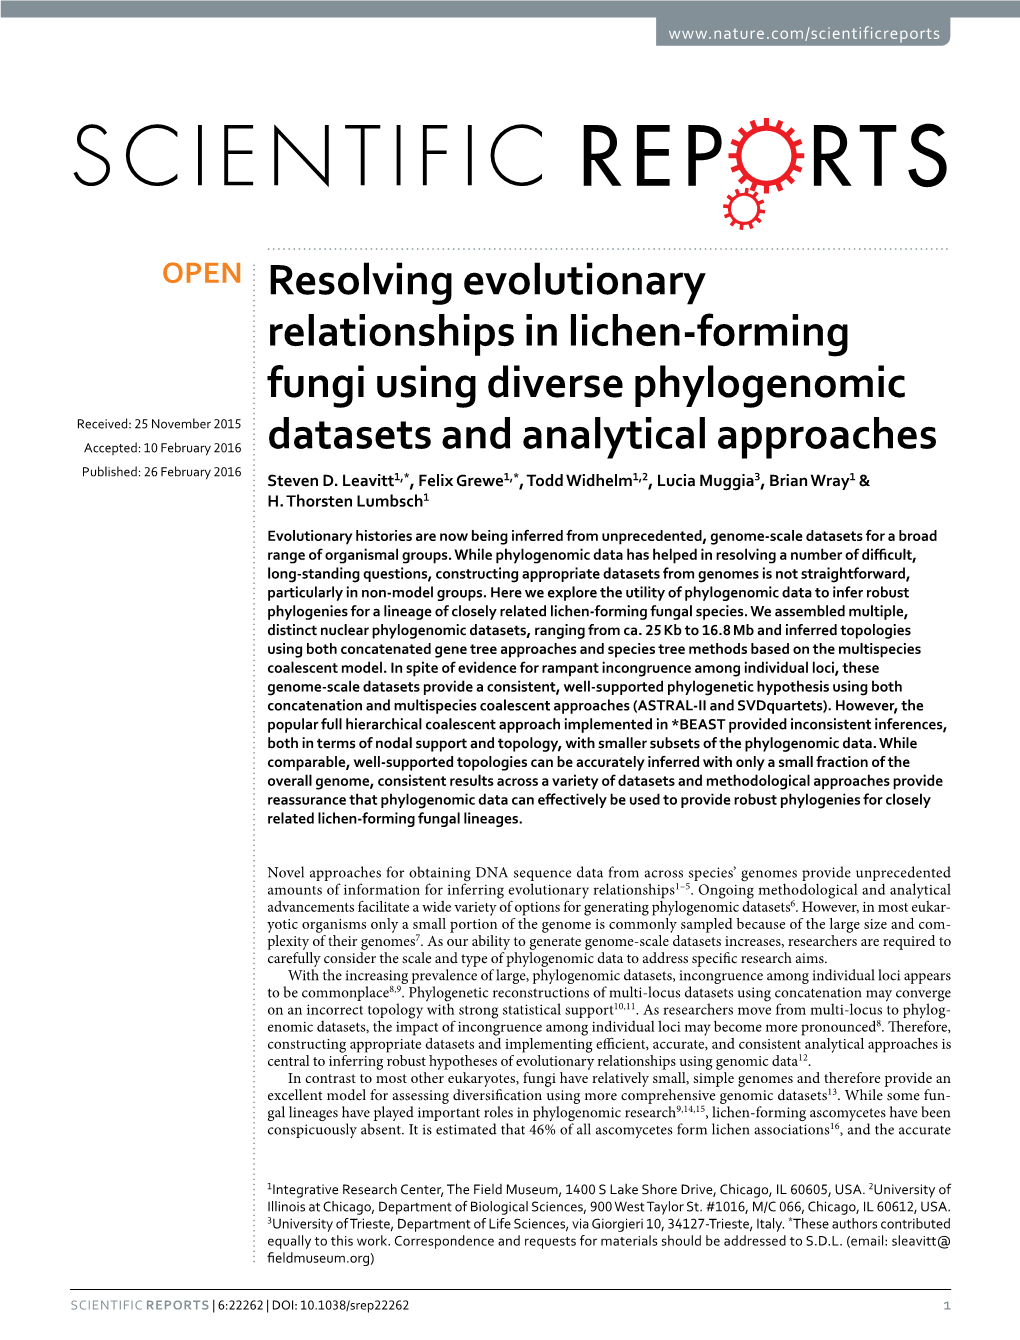 Resolving Evolutionary Relationships in Lichen-Forming Fungi Using